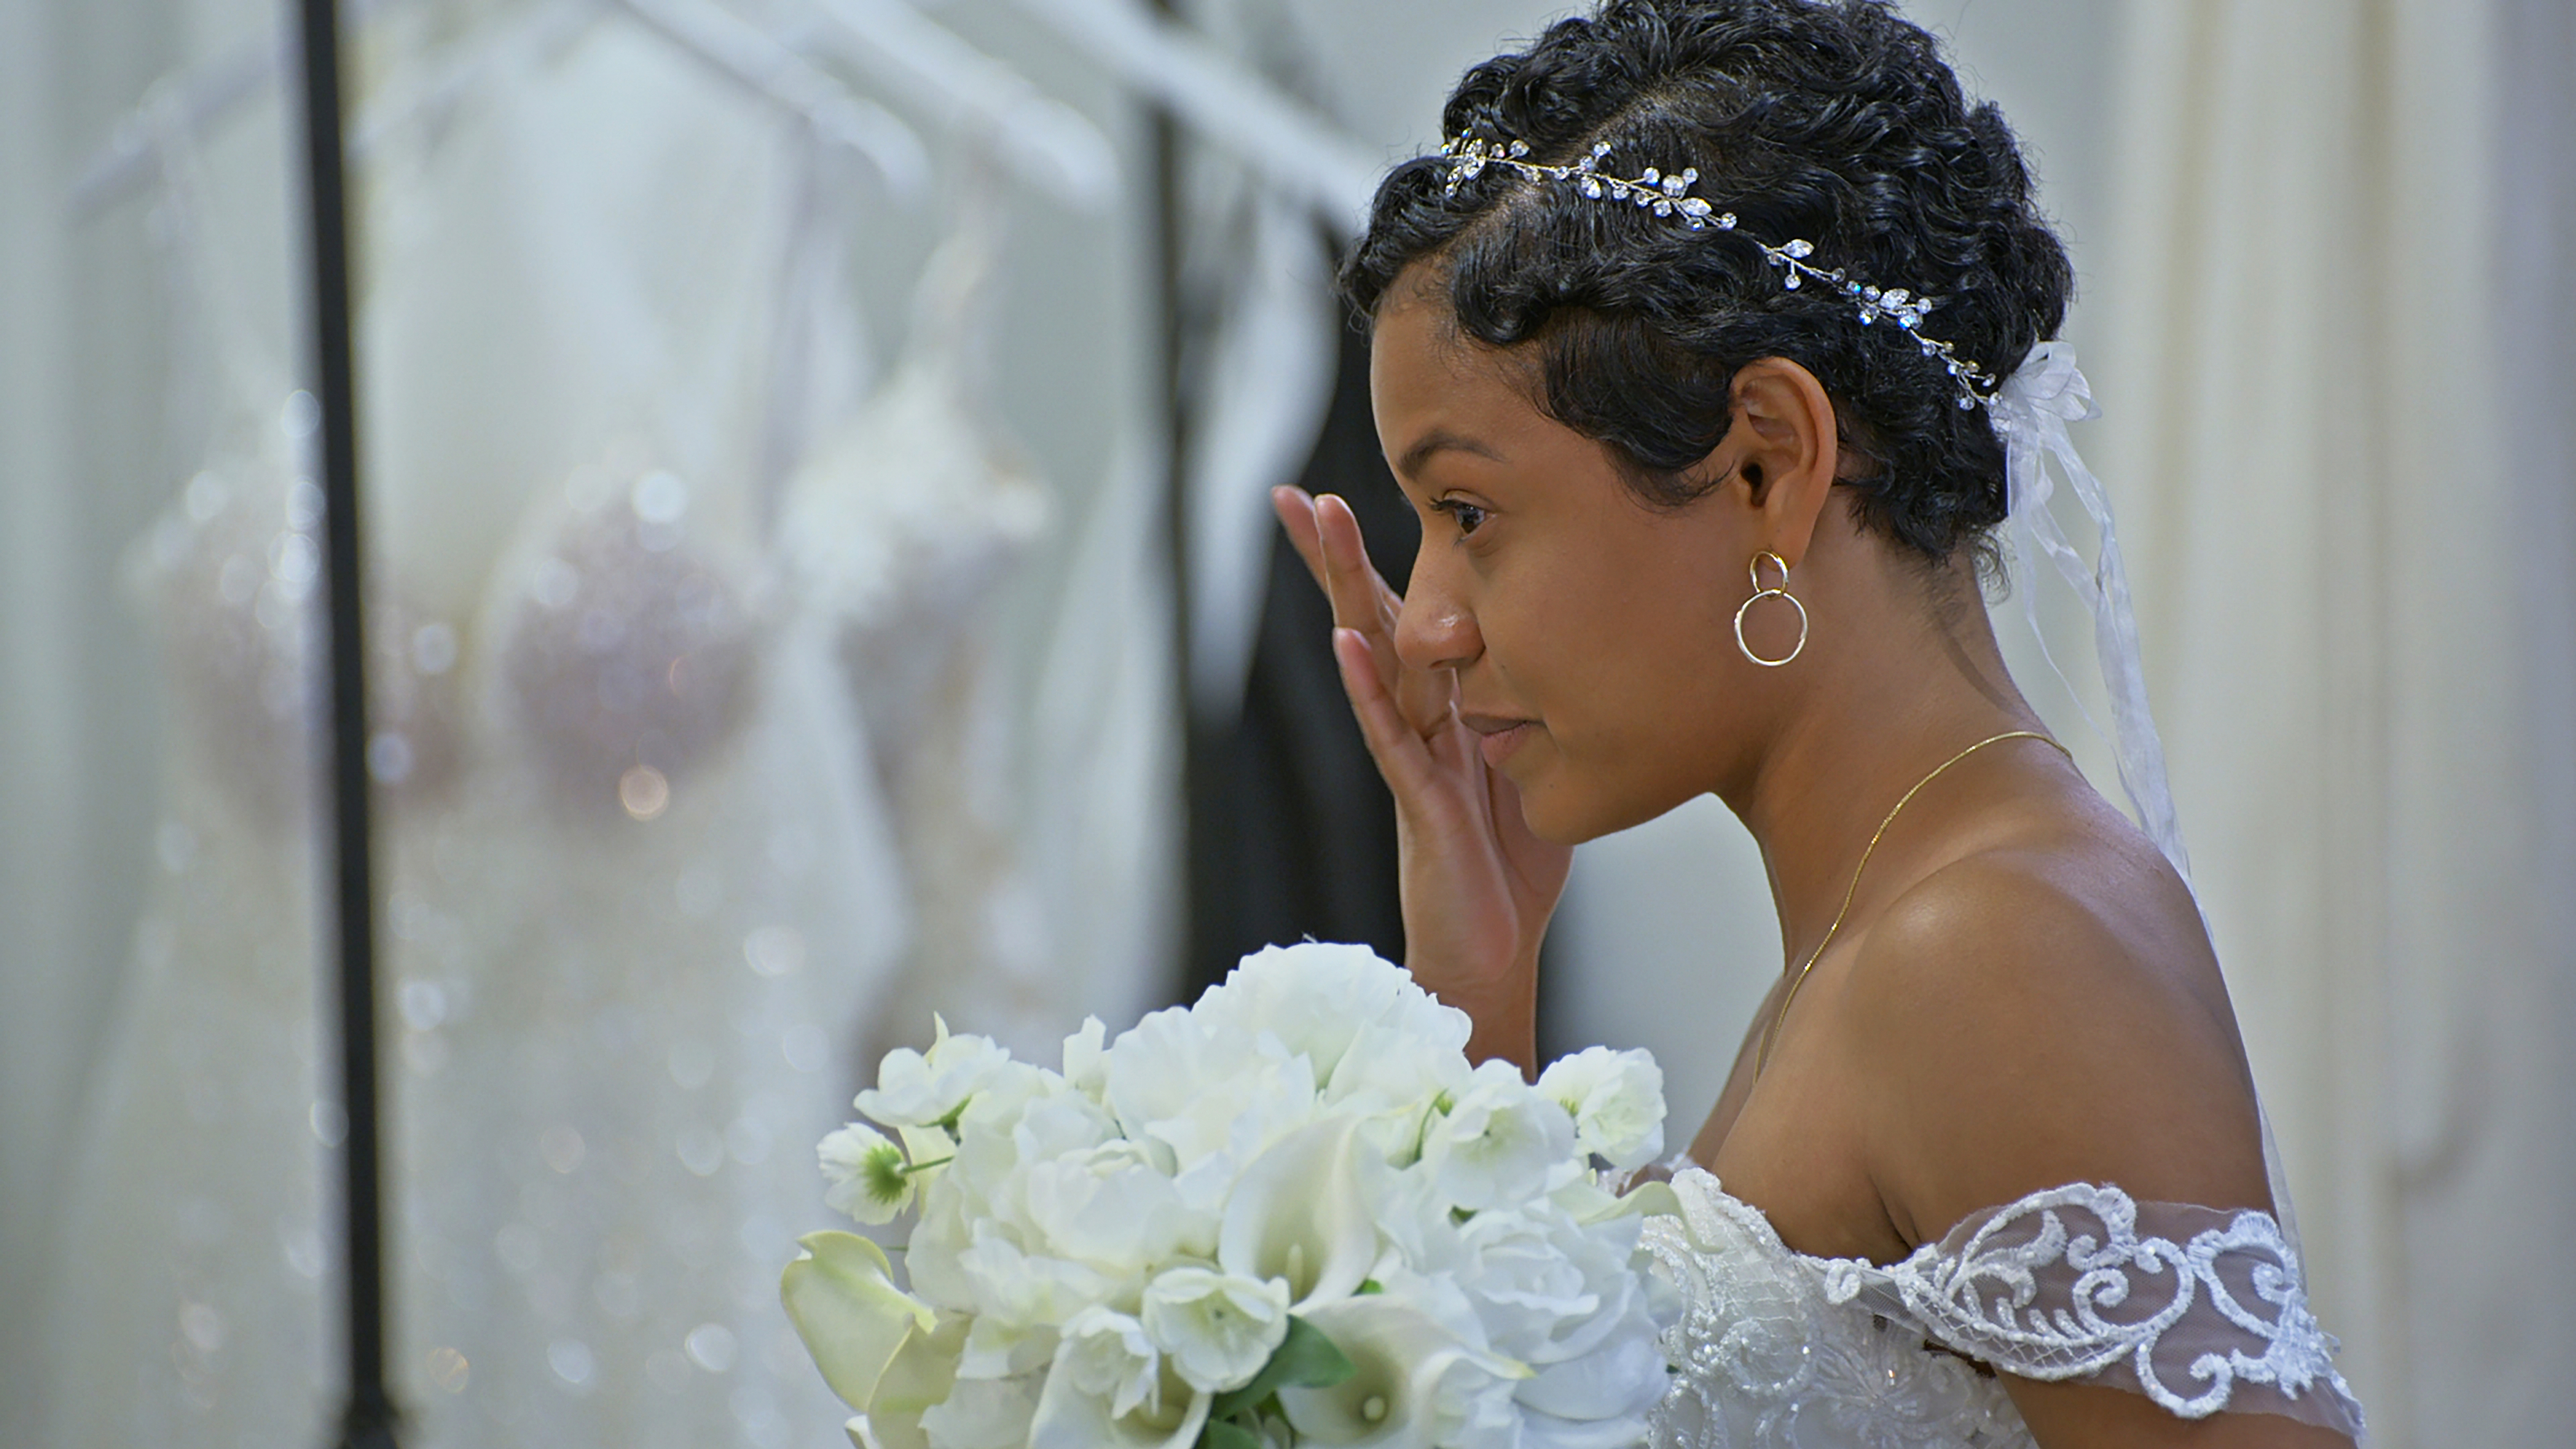 Iyanna wiping away tears while she wears her wedding dress inside a bridal store